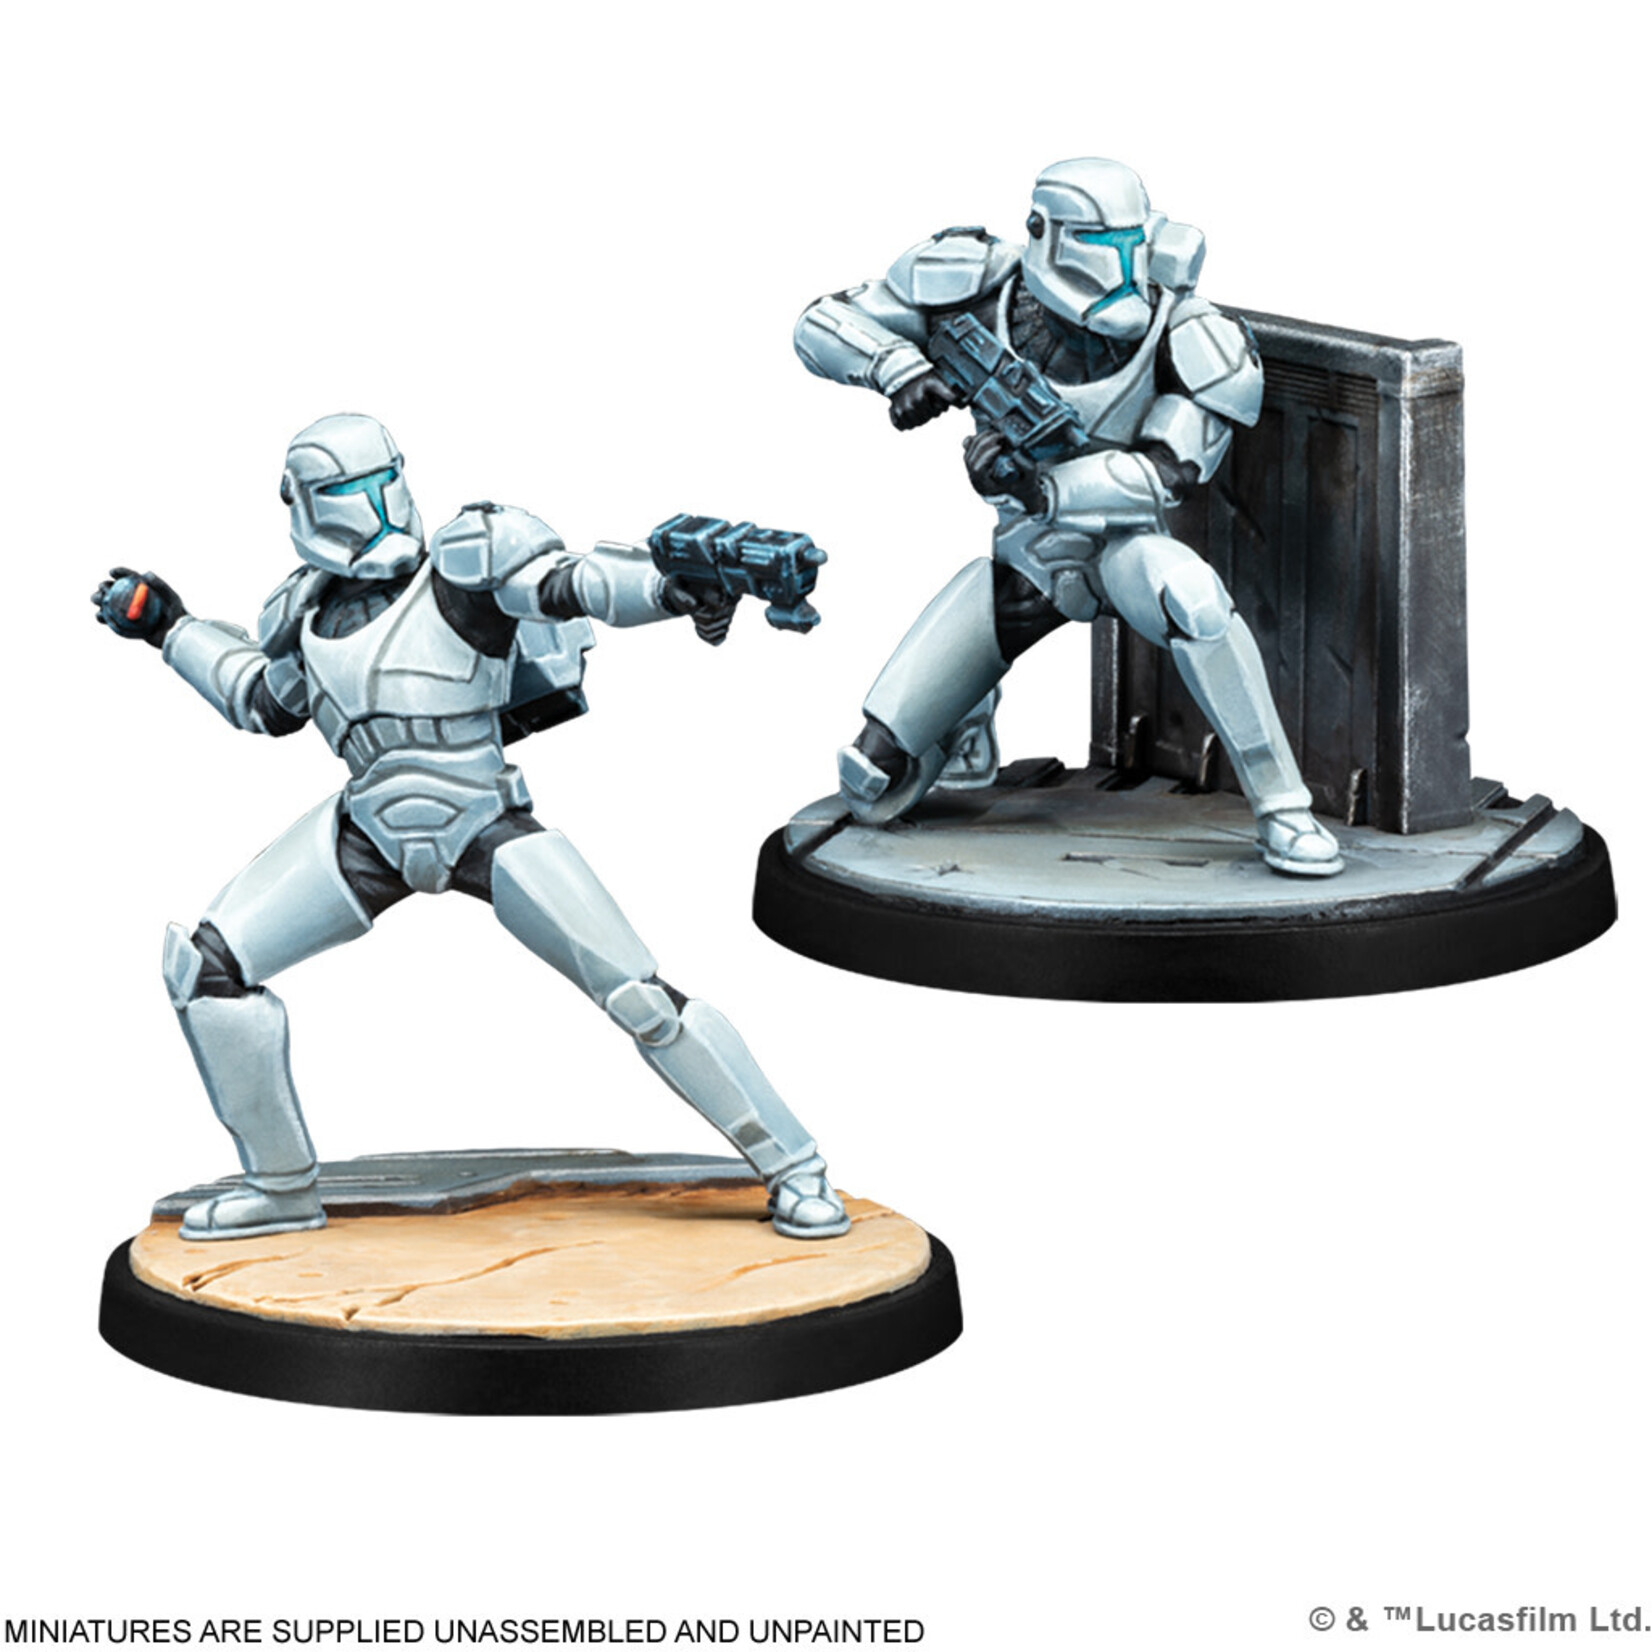 Atomic Mass Games Star Wars: Shatterpoint: Plans and Preparation Squad Pack